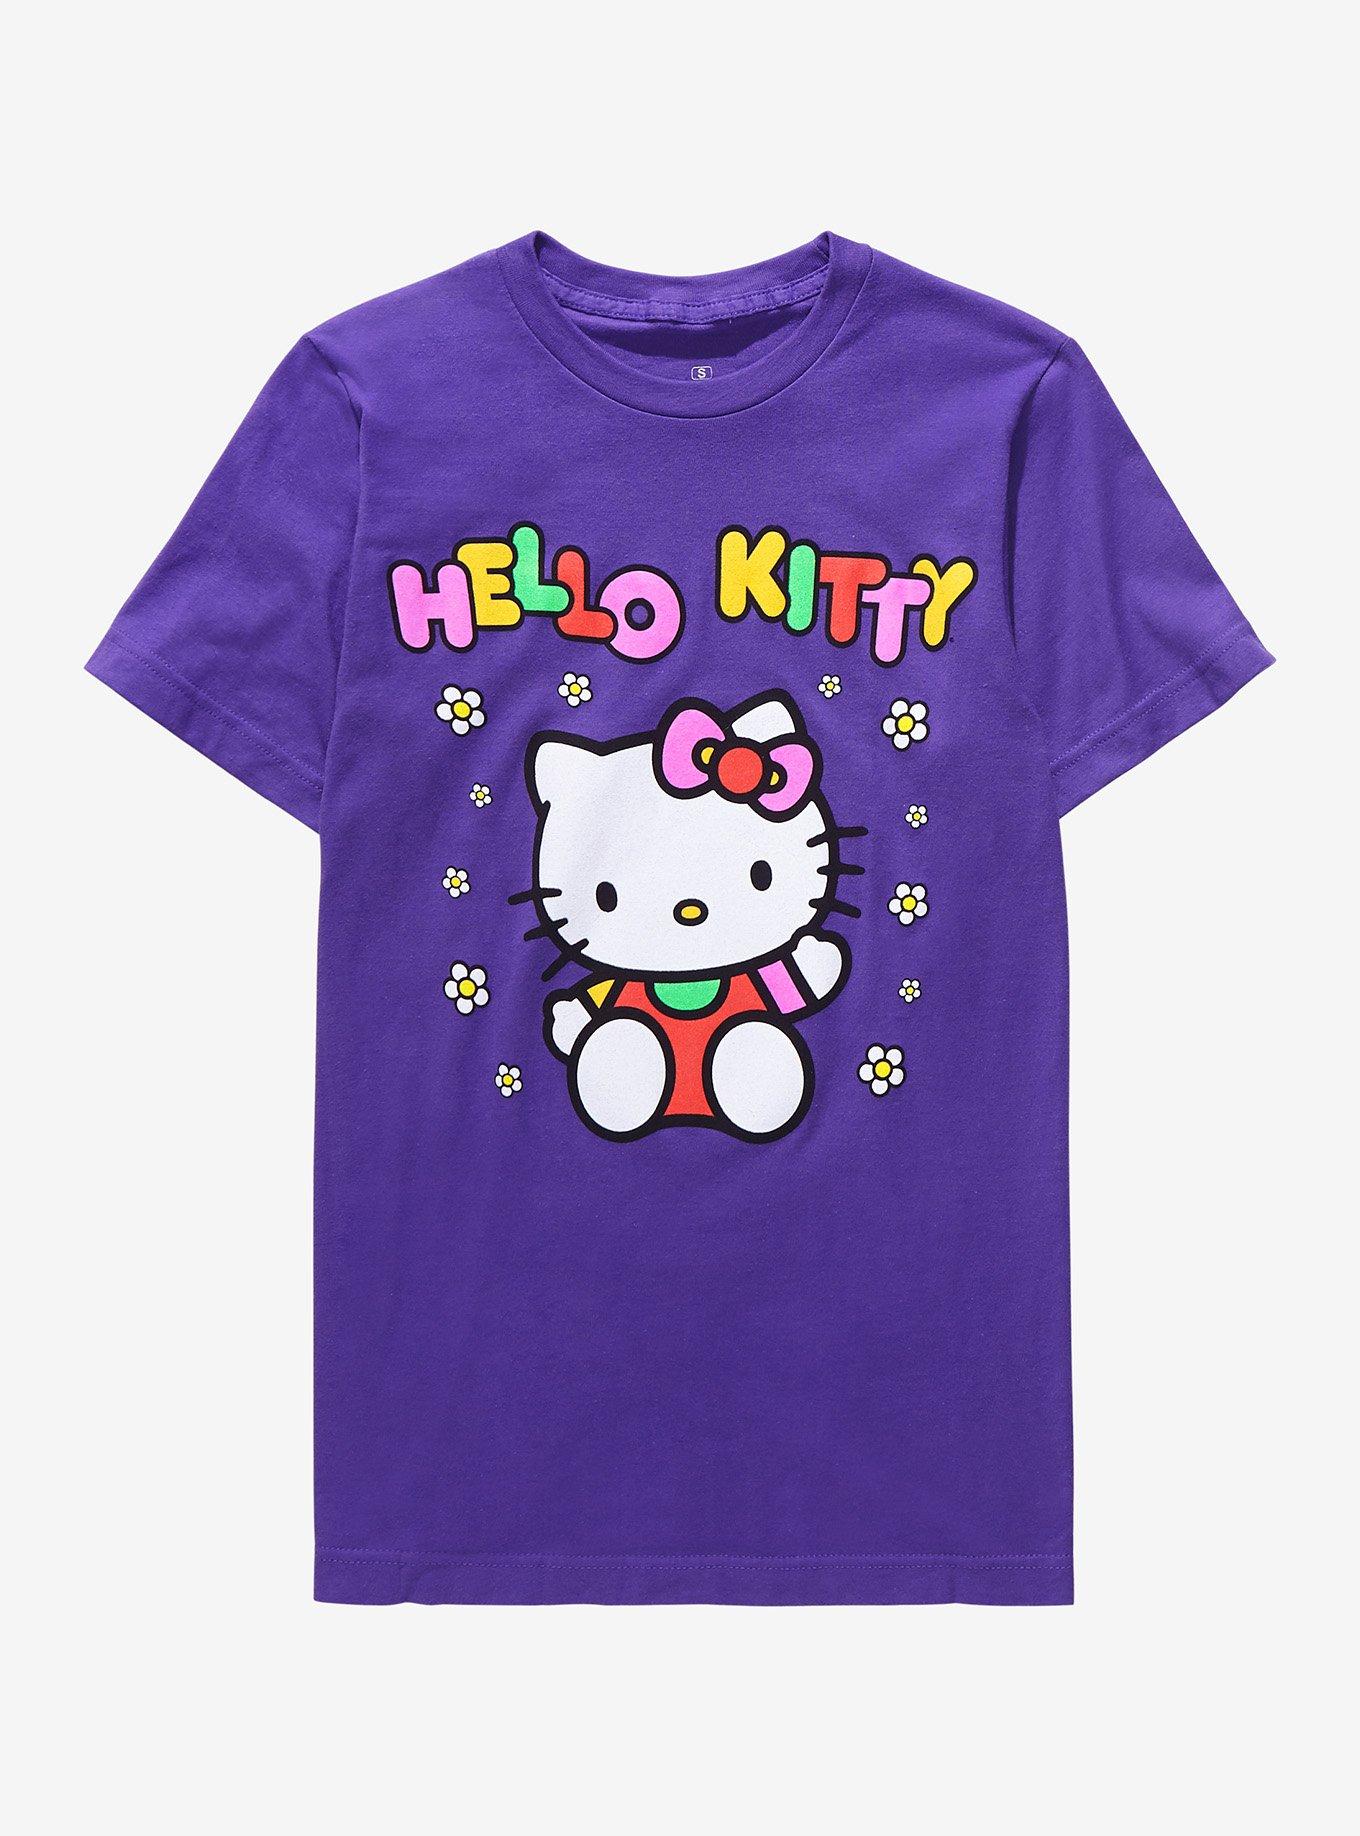 Sanrio Hello Kitty Multicolor Floral Women's T-Shirt - BoxLunch Exclusive, PURPLE, hi-res